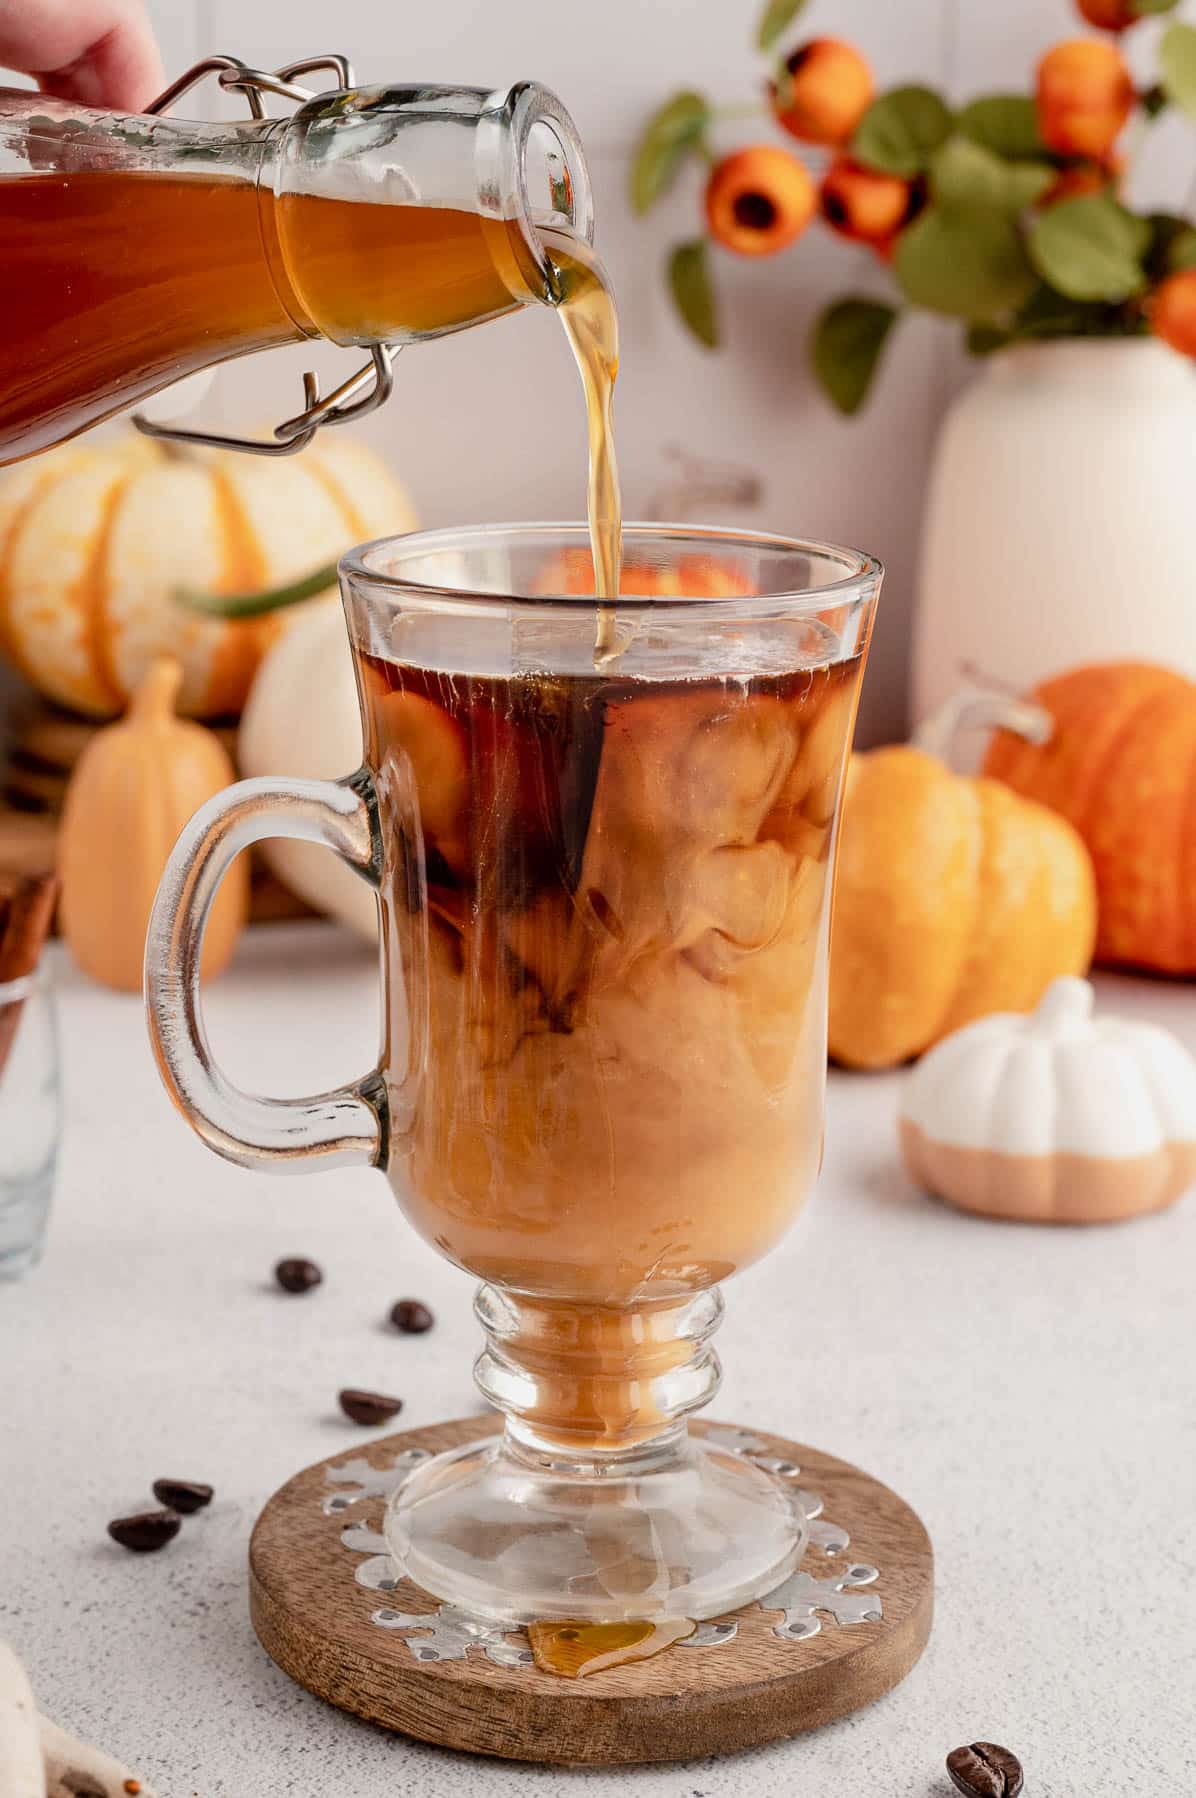 pouring pumpkin spice syrup into a glass mug of coffee for homemade pumpkin spice syrup